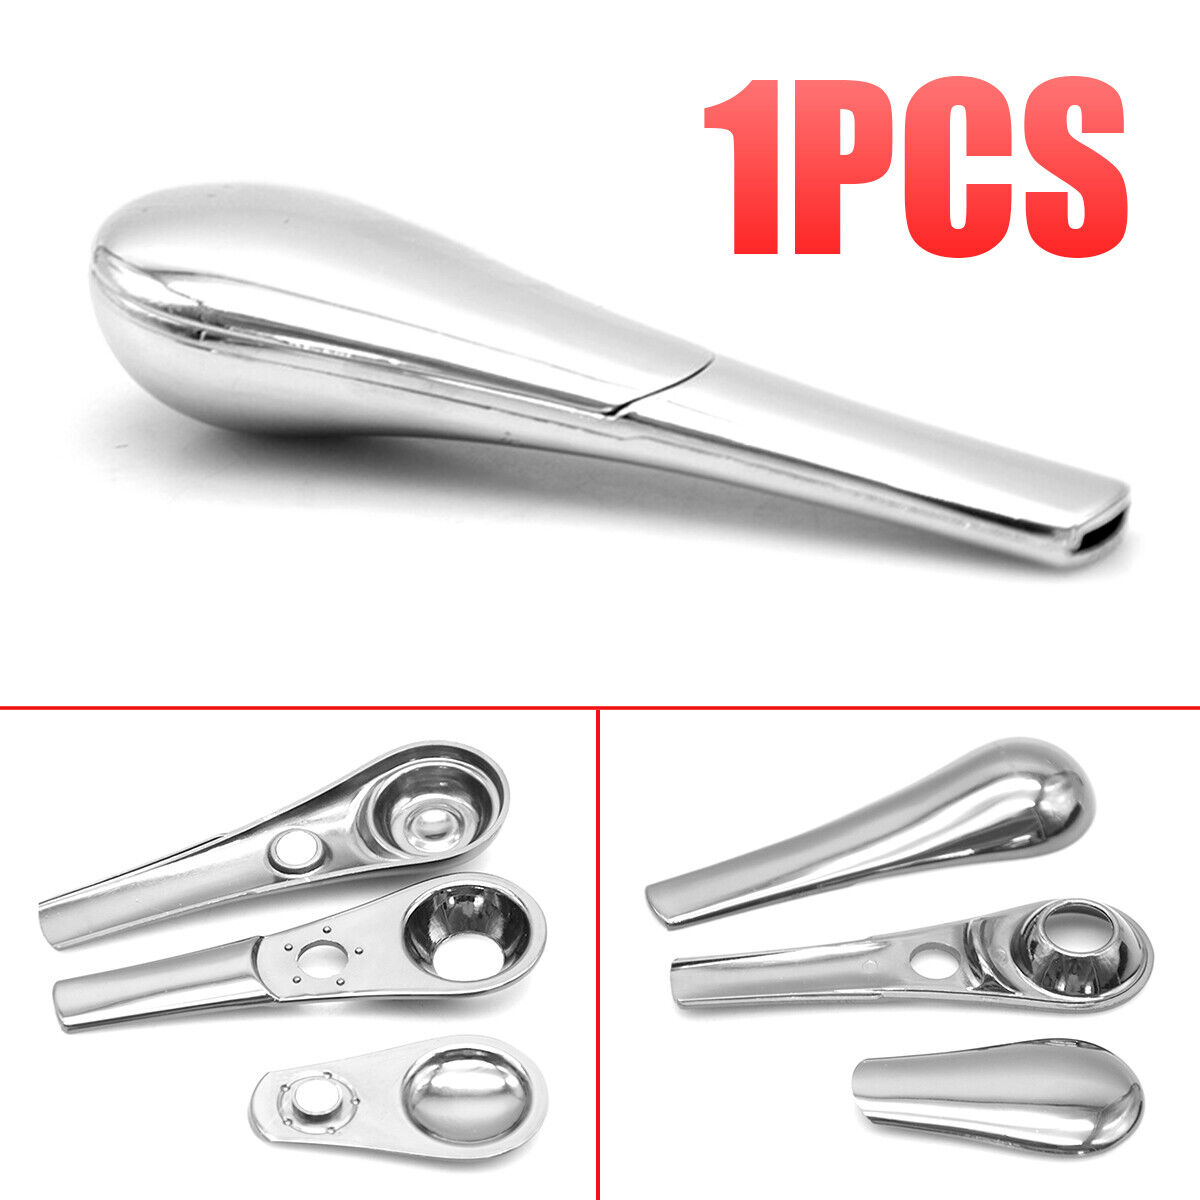 Portable Magnetic Metal Spoon Smoking Pipe Silver With Gift Box- FAST SHIP US